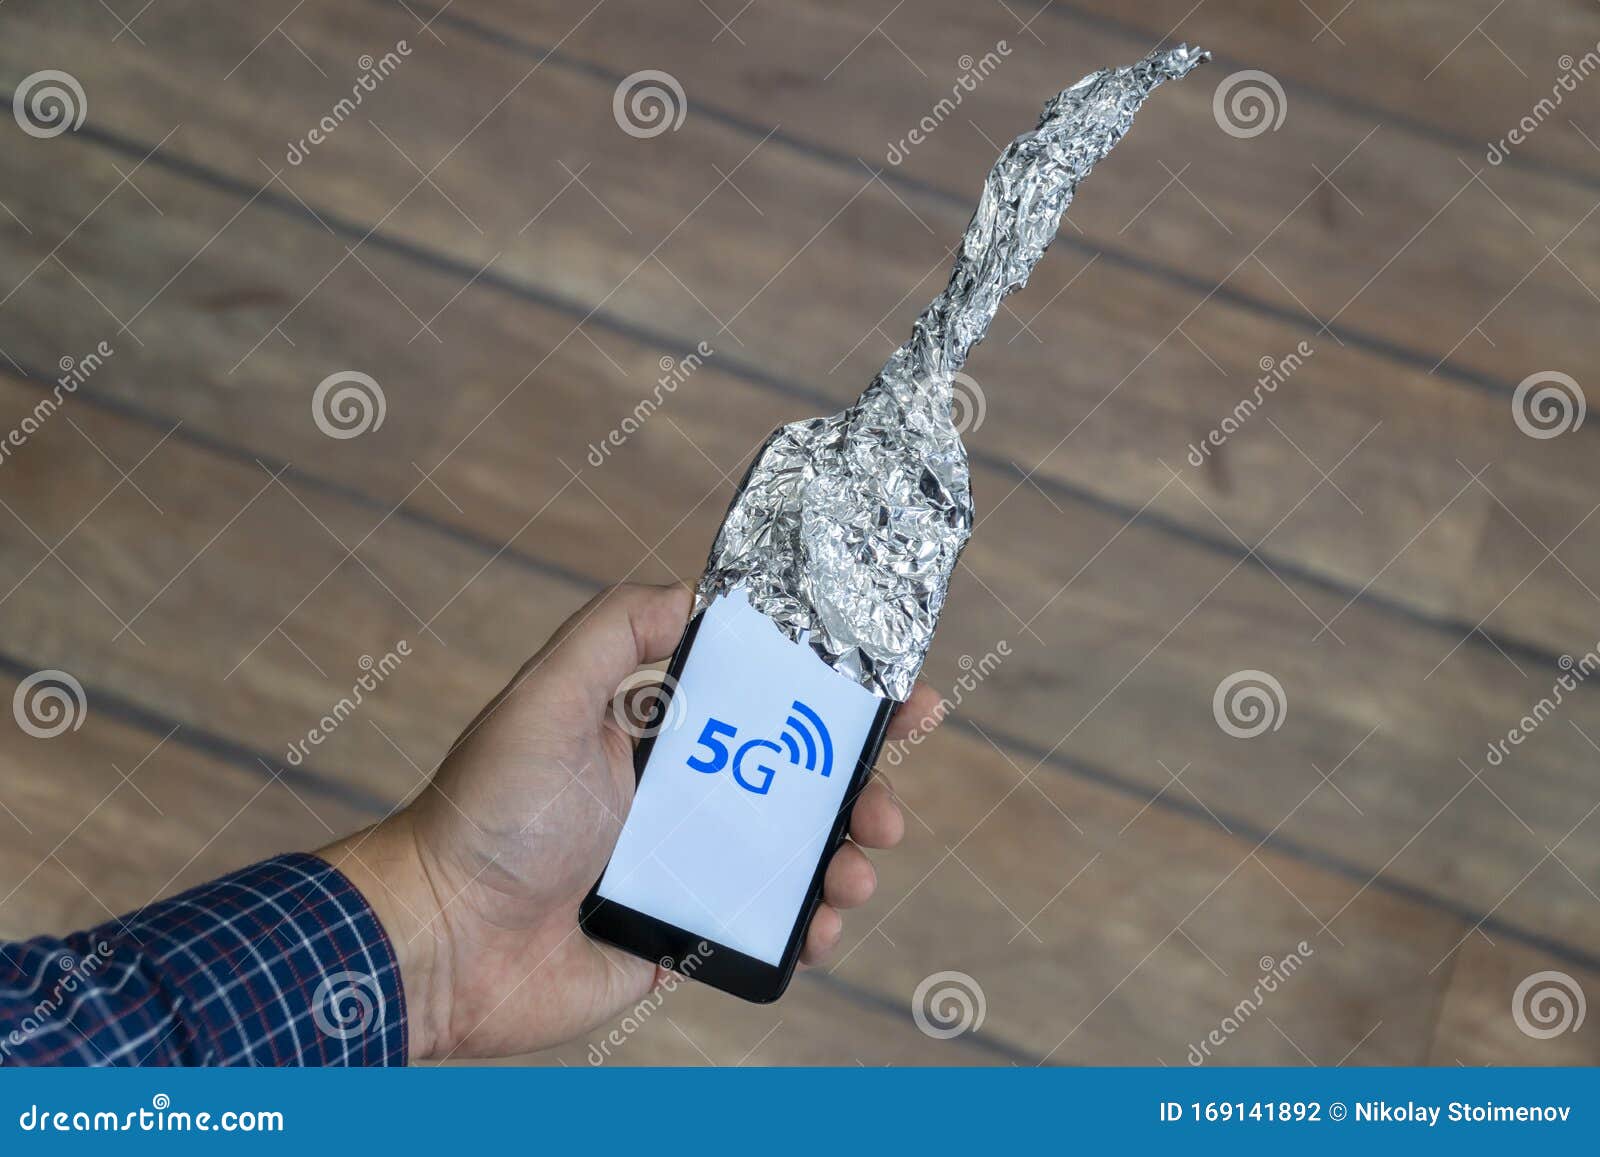 5g Smartphone With Aluminum Foil Antenna Stock Photo Image of digital